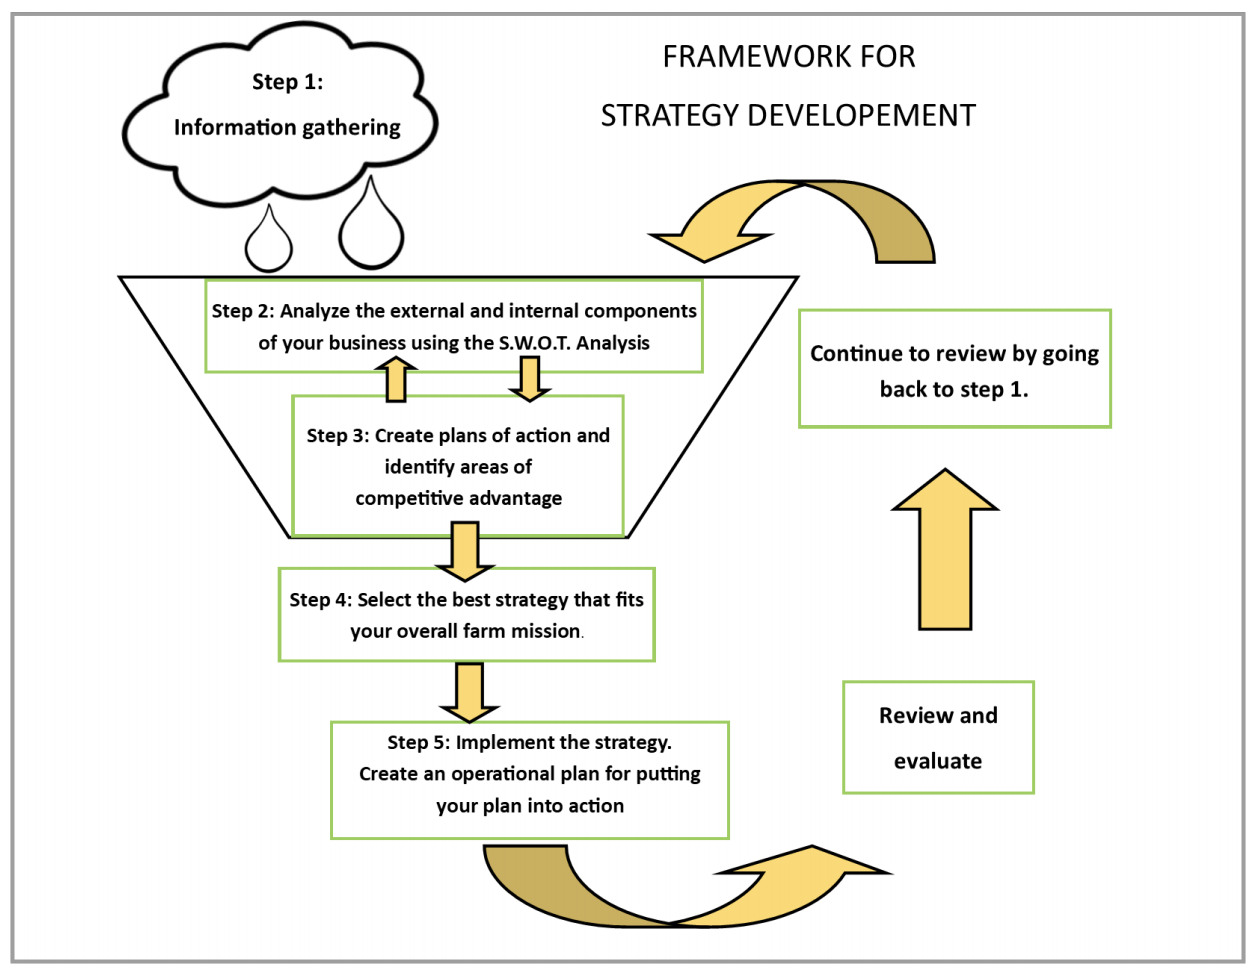 Framework for strategy development with the five steps listed, review and evaluate, and continue to reviews by going back to step 1